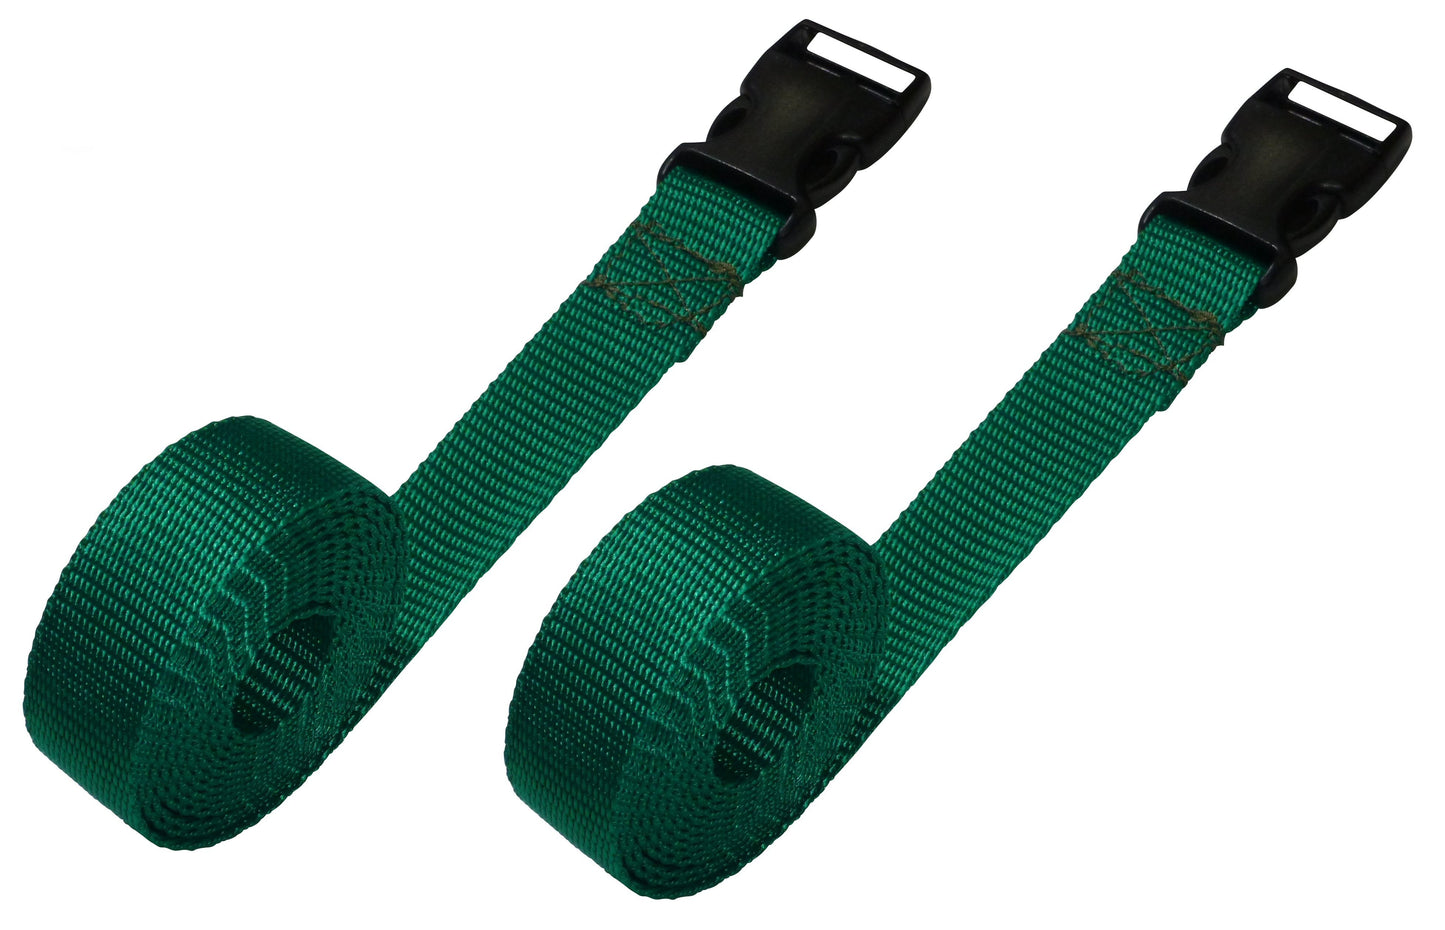 Benristraps 25mm Webbing Strap with Quick Release Buckle (Pair) in emerald